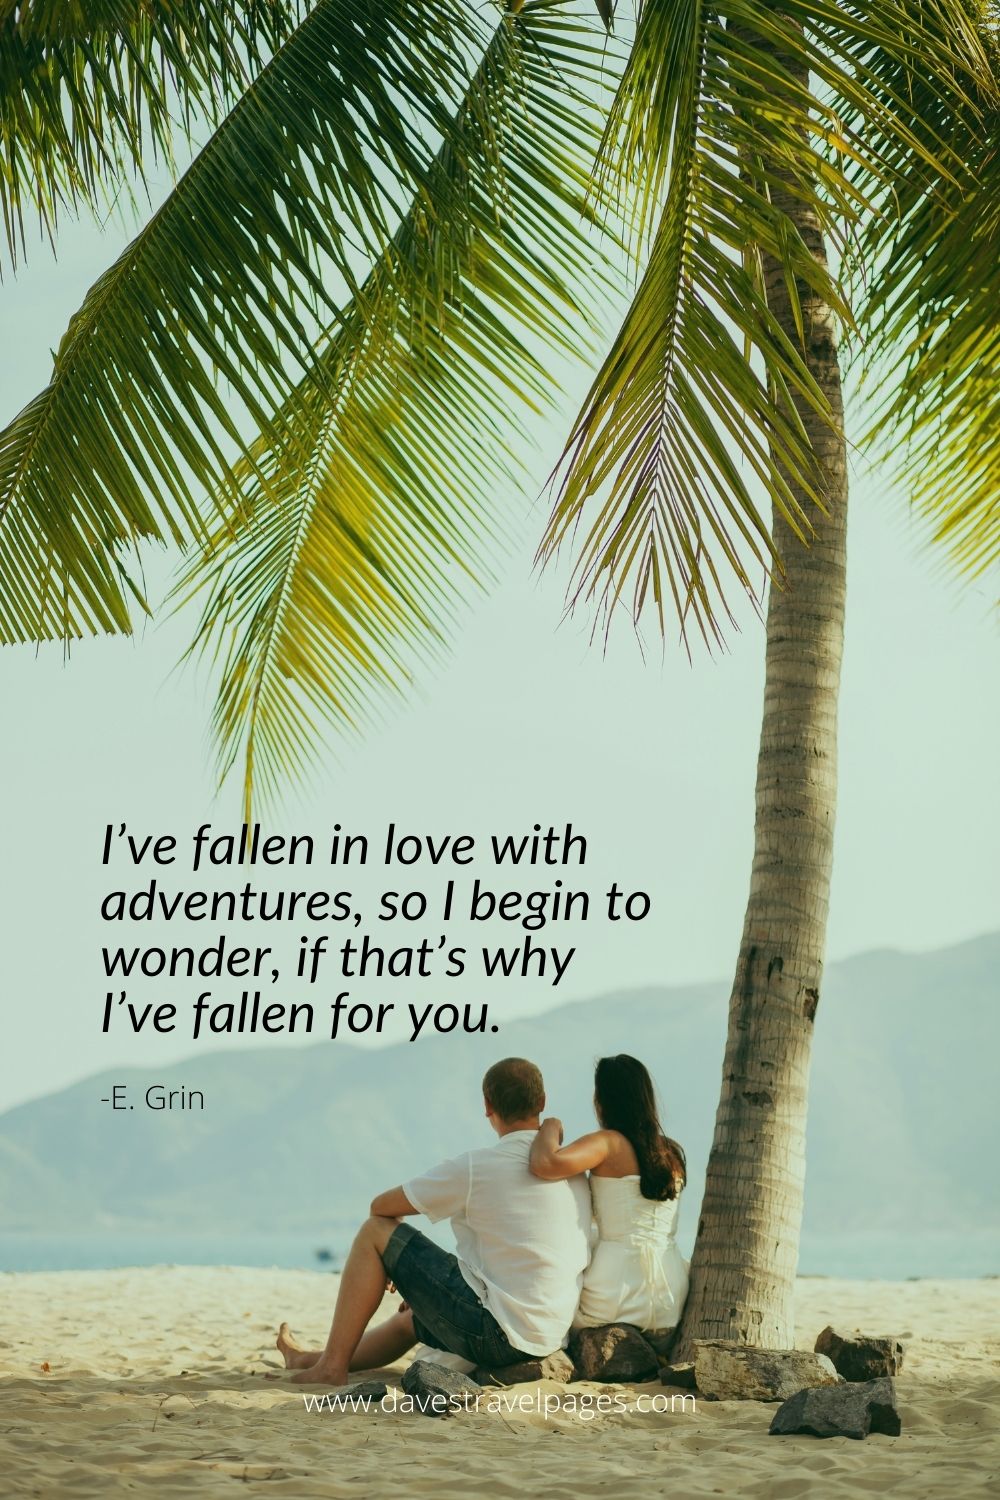 I’ve fallen in love with adventures, so I begin to wonder, if that’s why I’ve fallen for you.